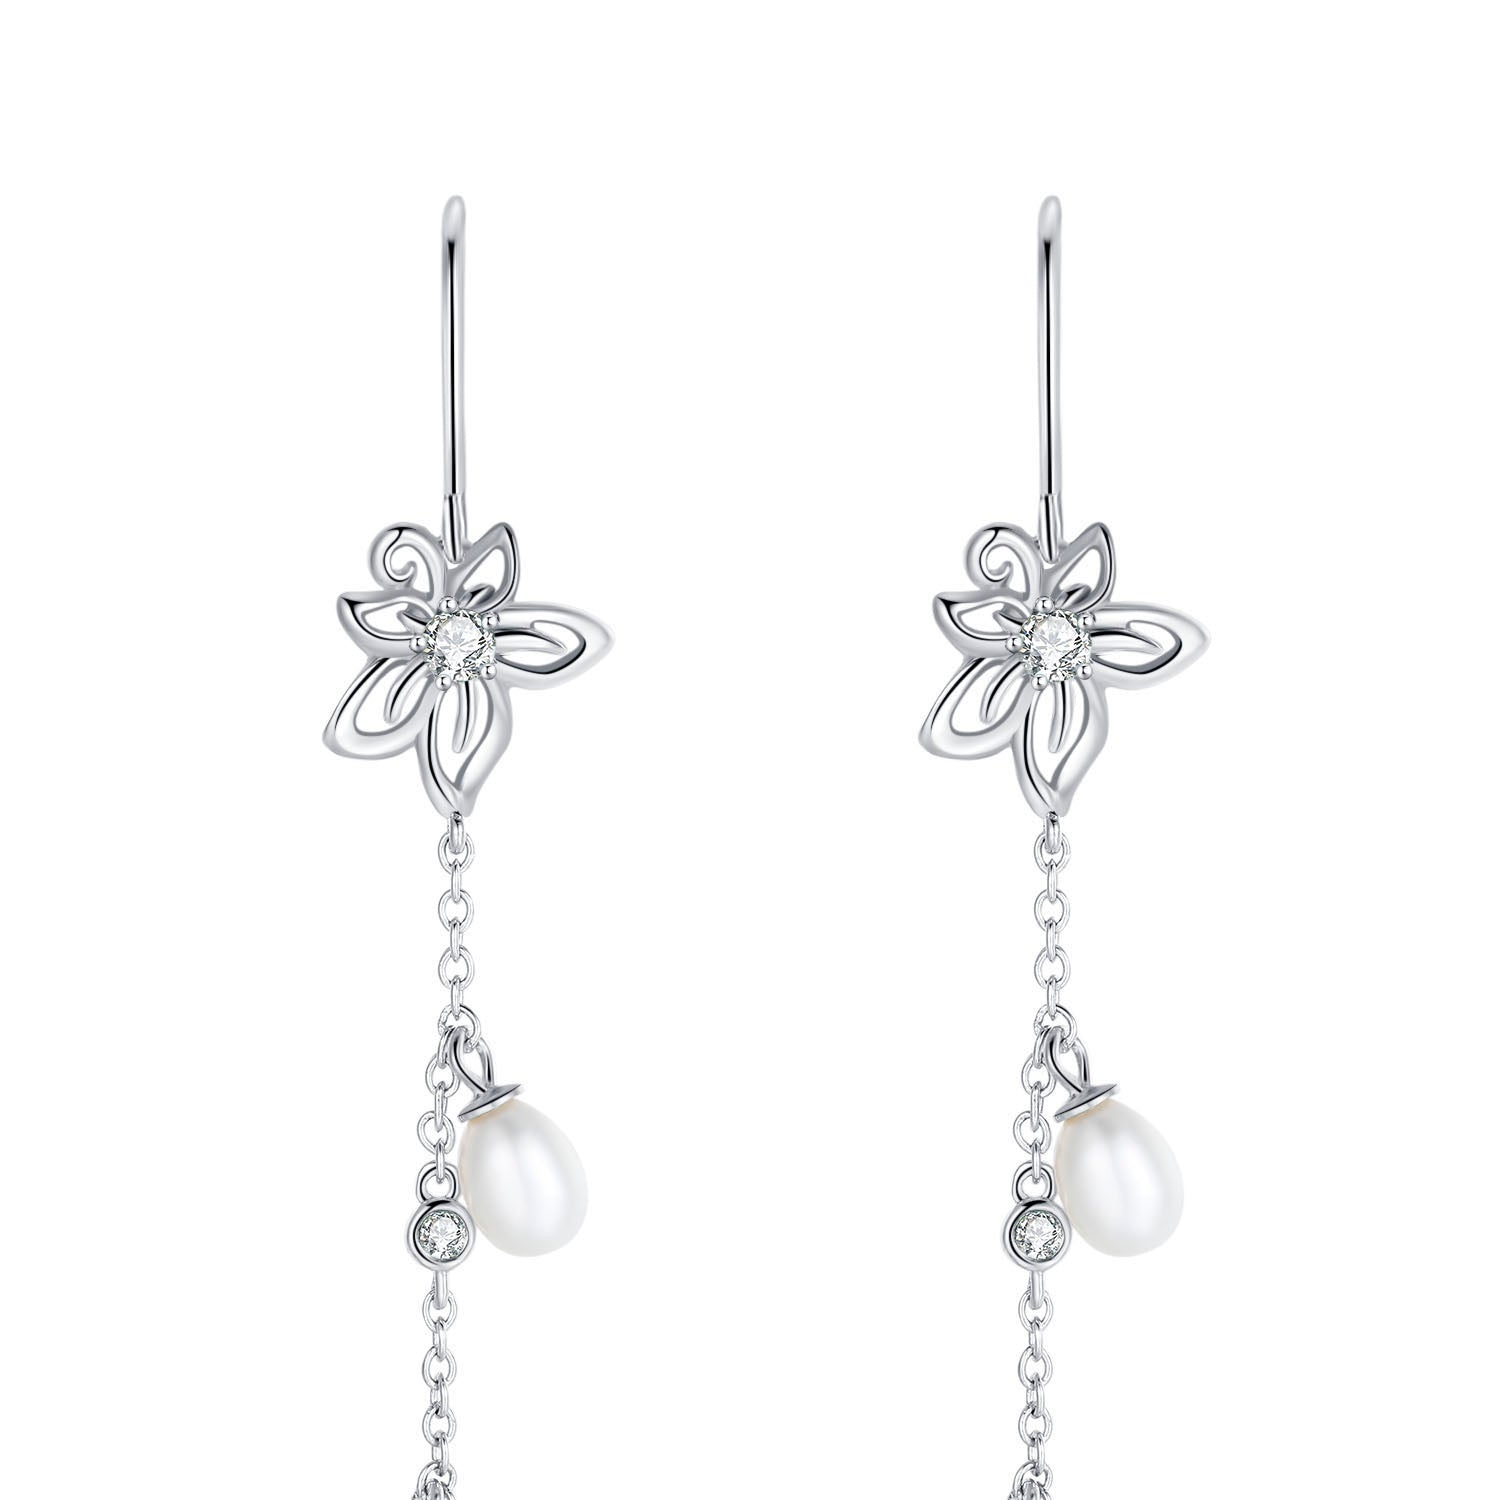 Vicacci 925 Silver Bauhinia Chain Earrings with Swarovski Clear Crystals